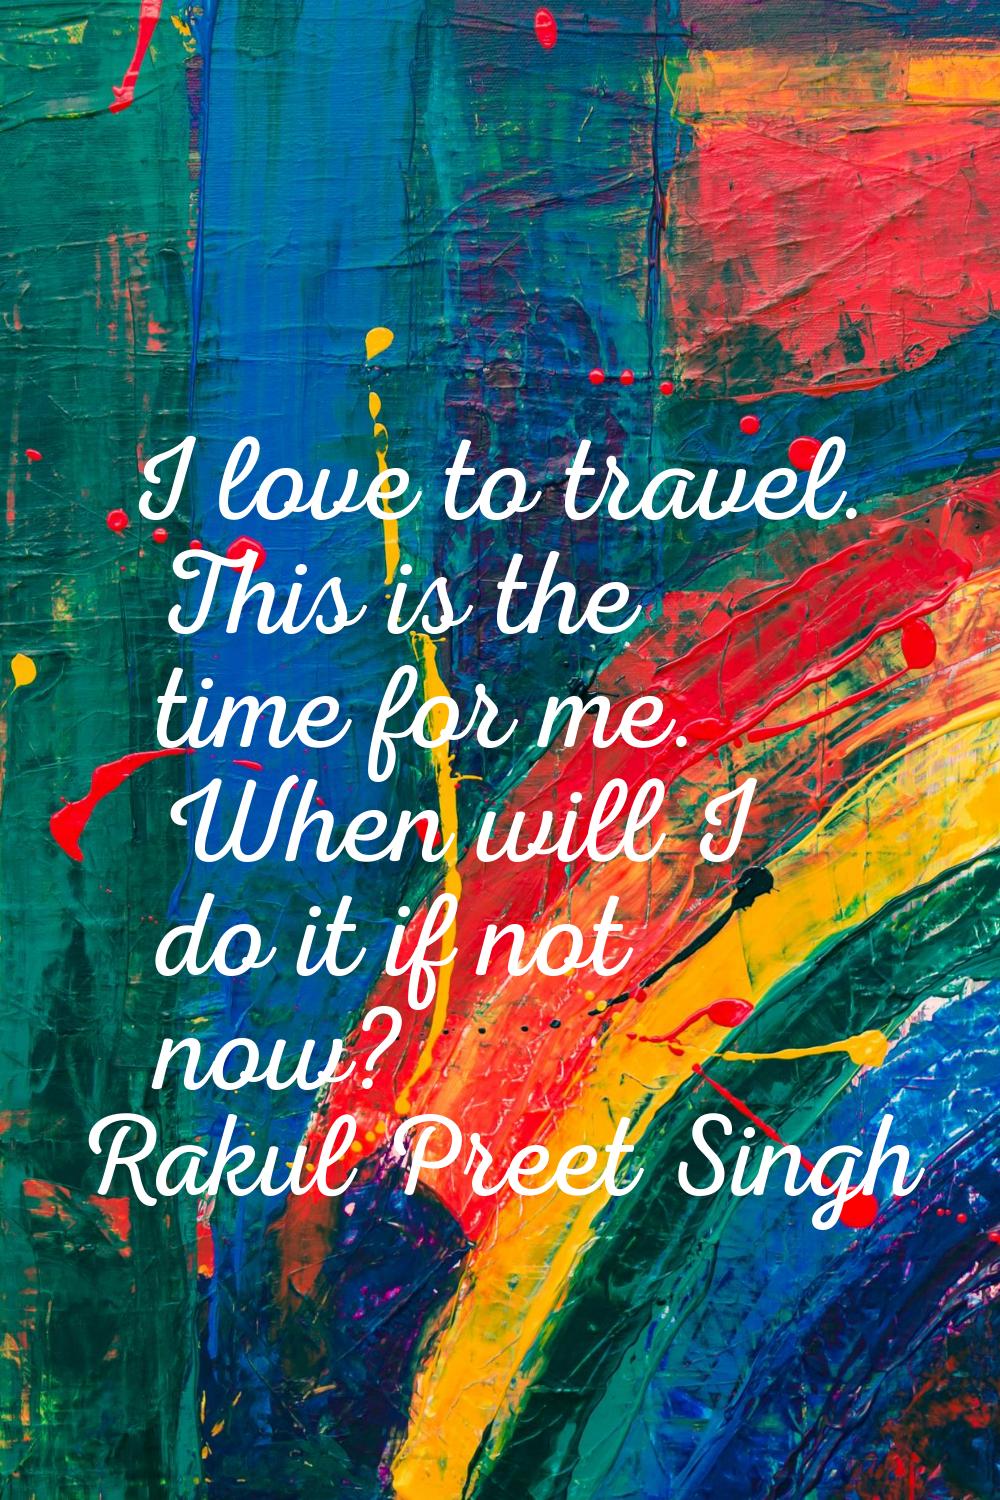 I love to travel. This is the time for me. When will I do it if not now?